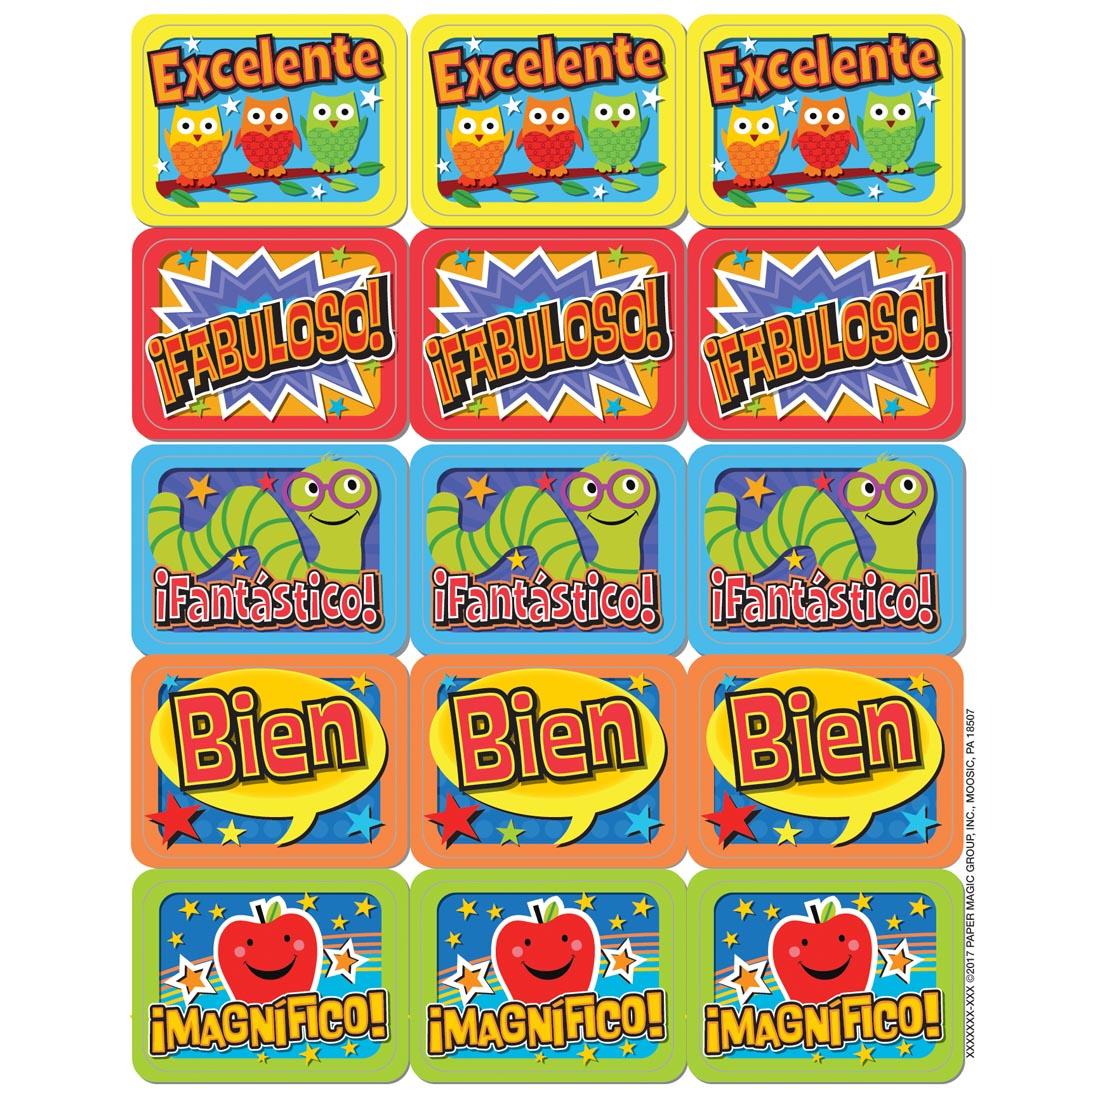 Spanish Success Stickers by Eureka with the messages Excelente, Fabuloso, Fantastico, Bien, Magnifico